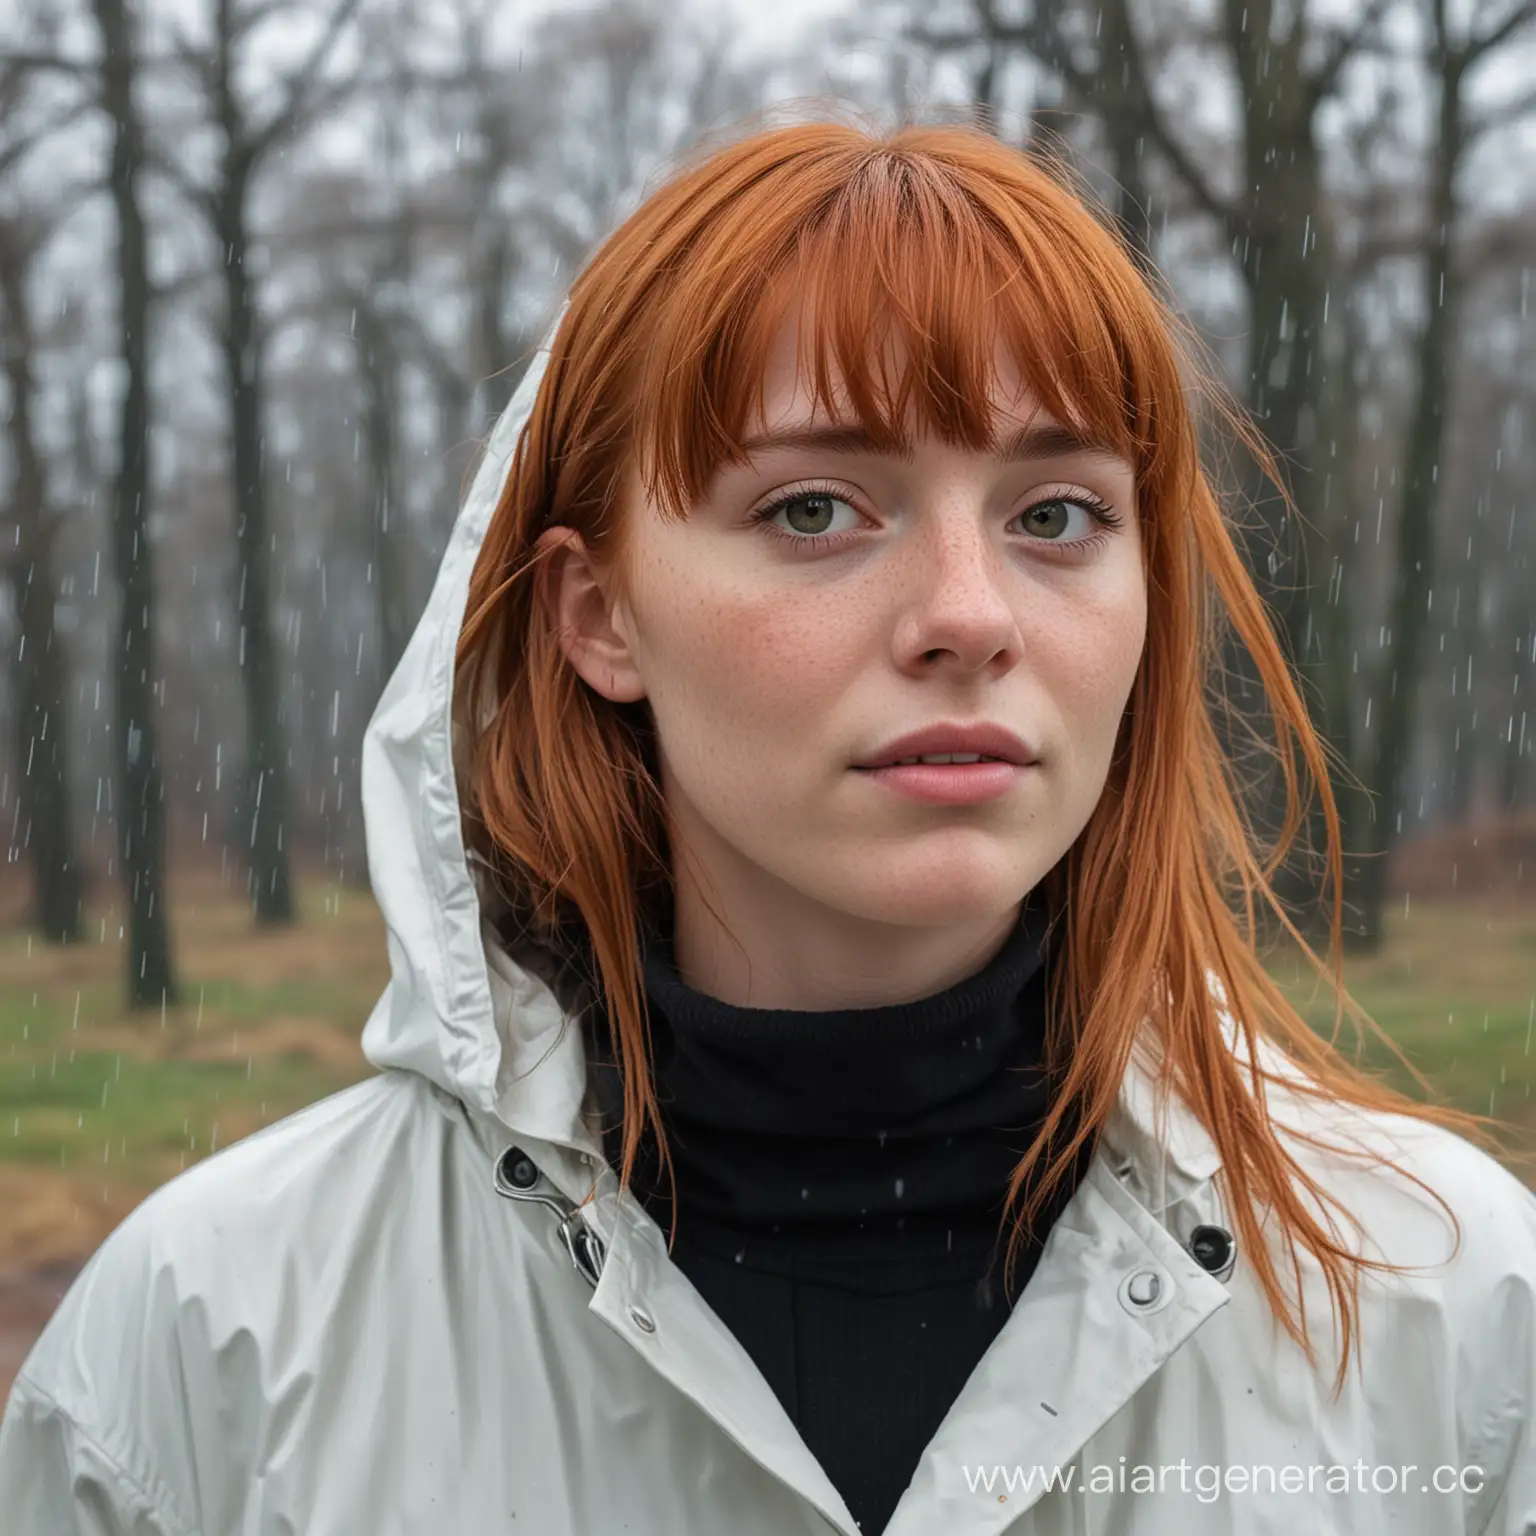 A 16-year-old girl with red hair and bangs. Strands on the sides fall to her shoulders, on her face, freckles, in a black turtleneck and a full-length white raincoat.